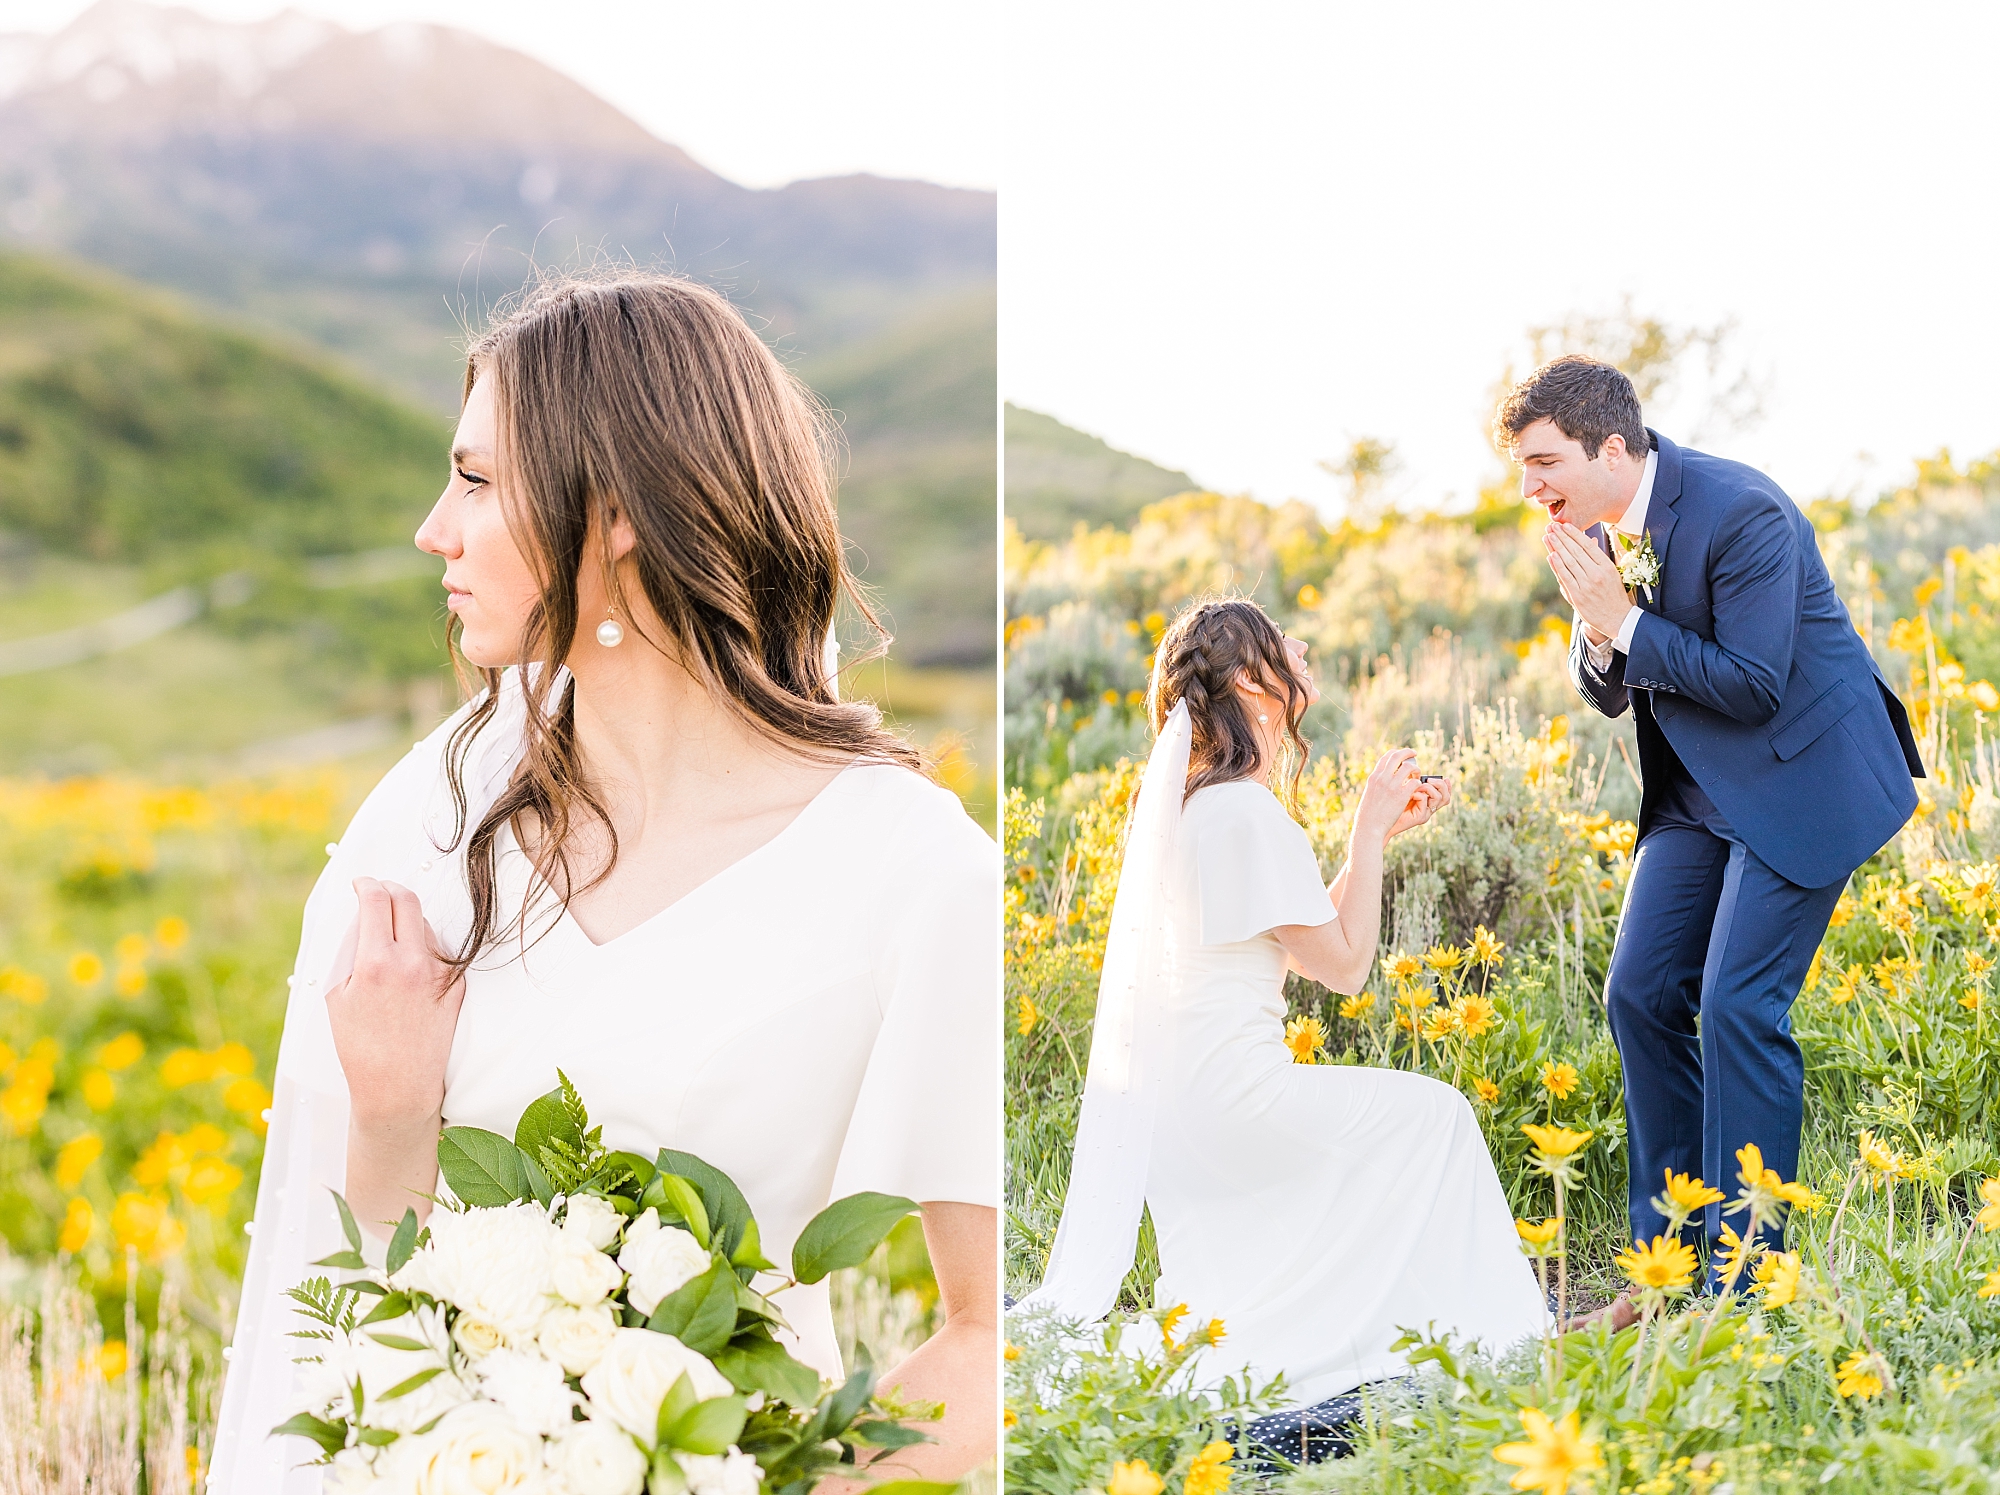 Utah formals session in the mountains